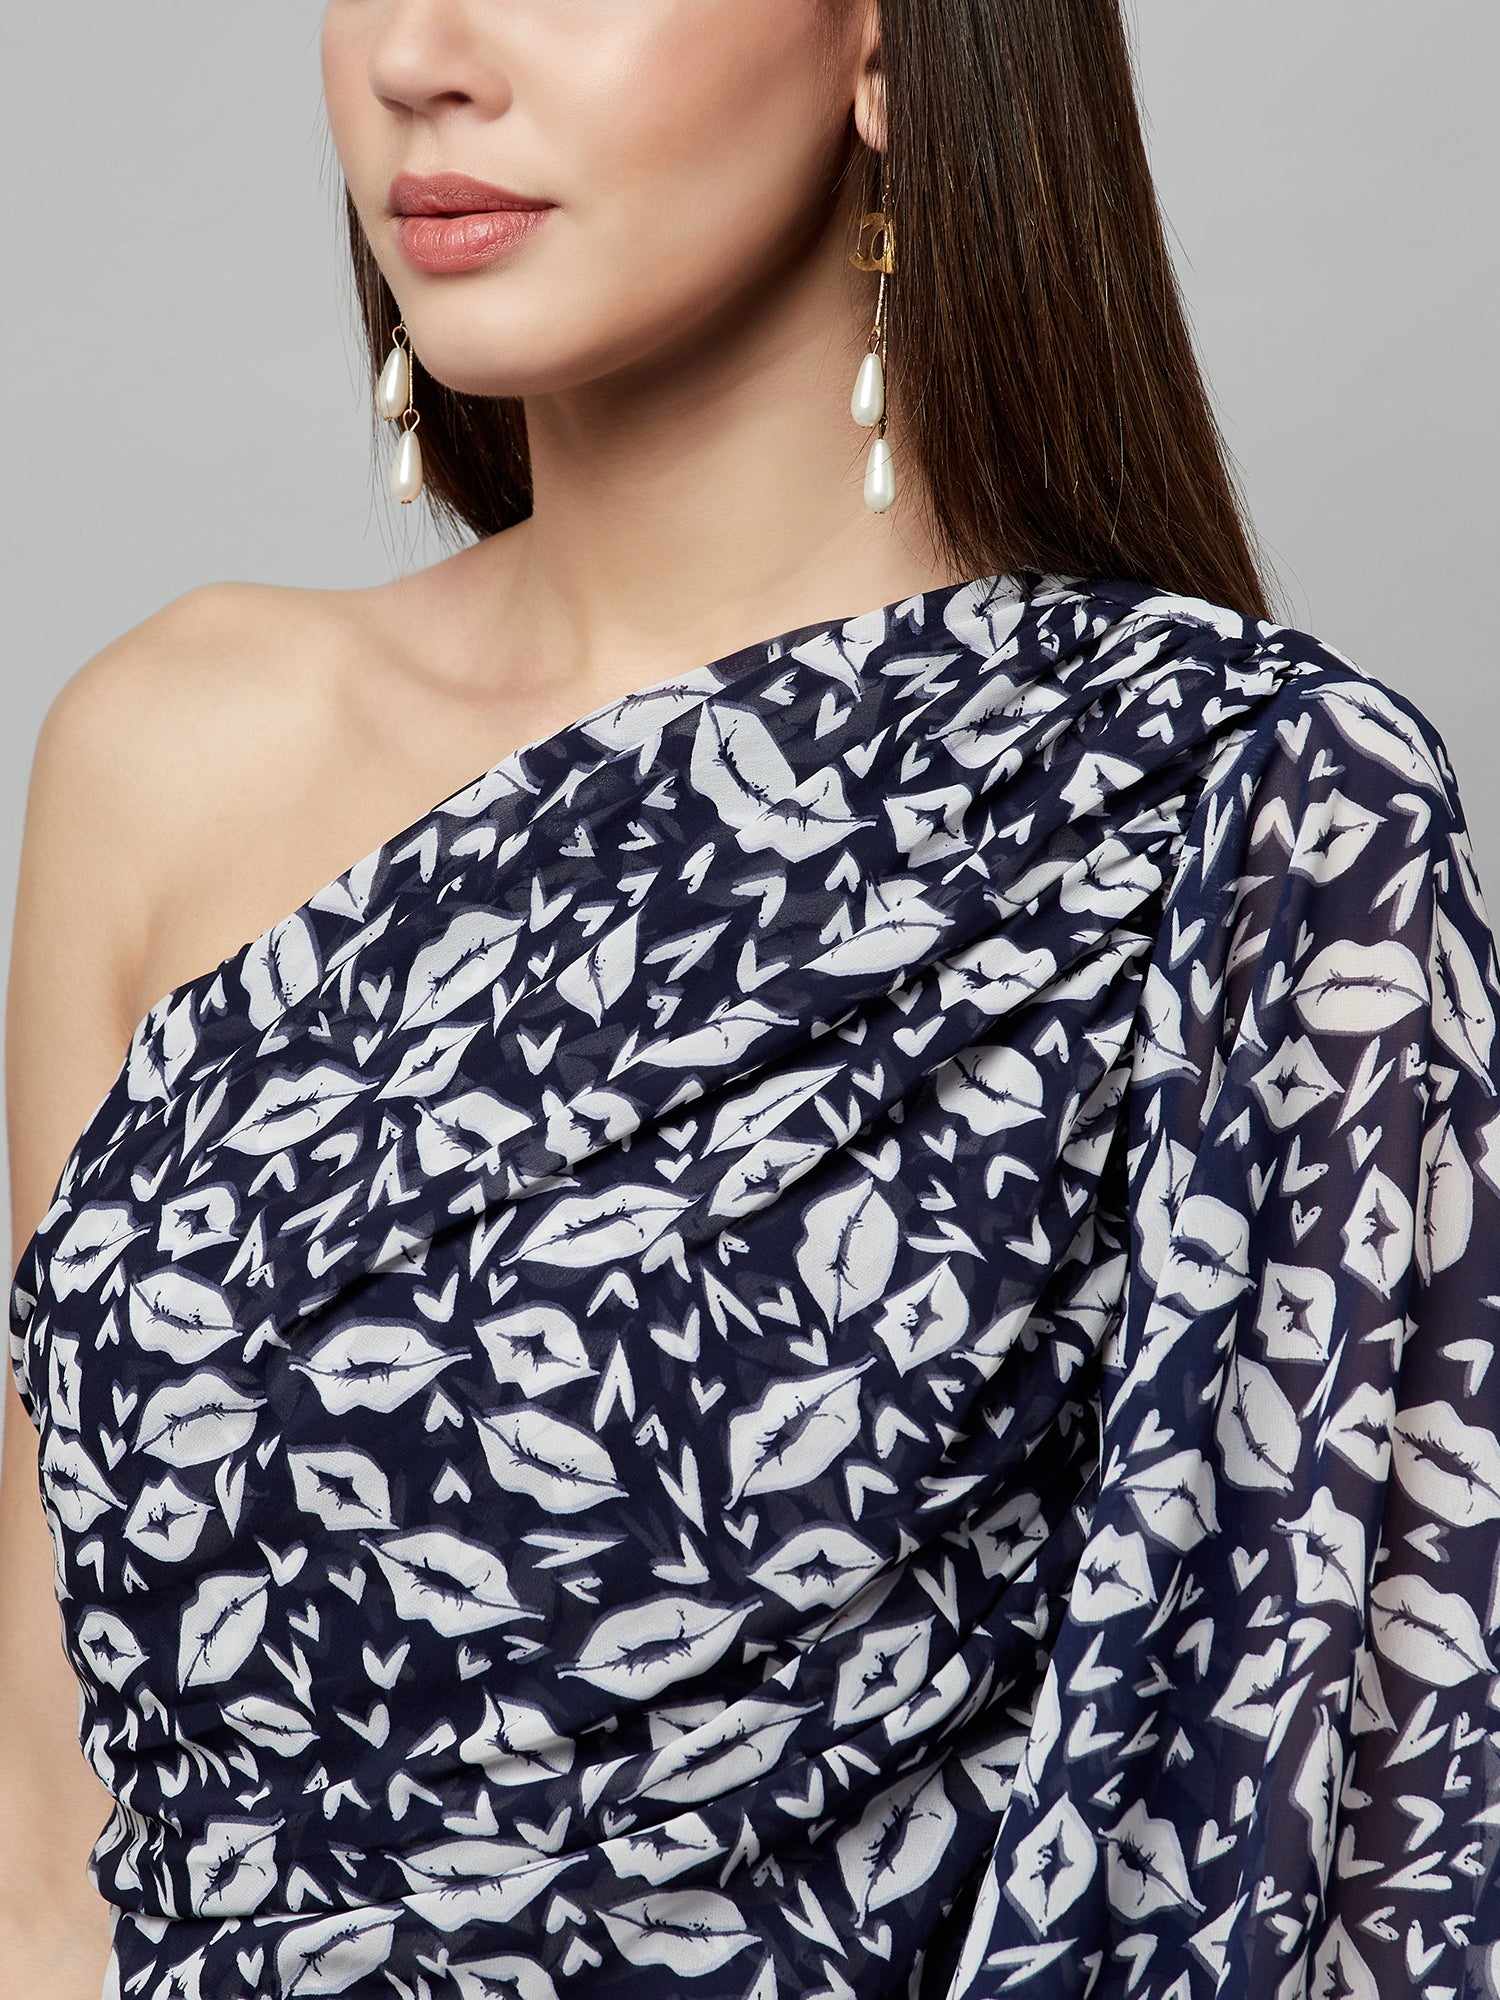 statement opulent sleeve printed blouse